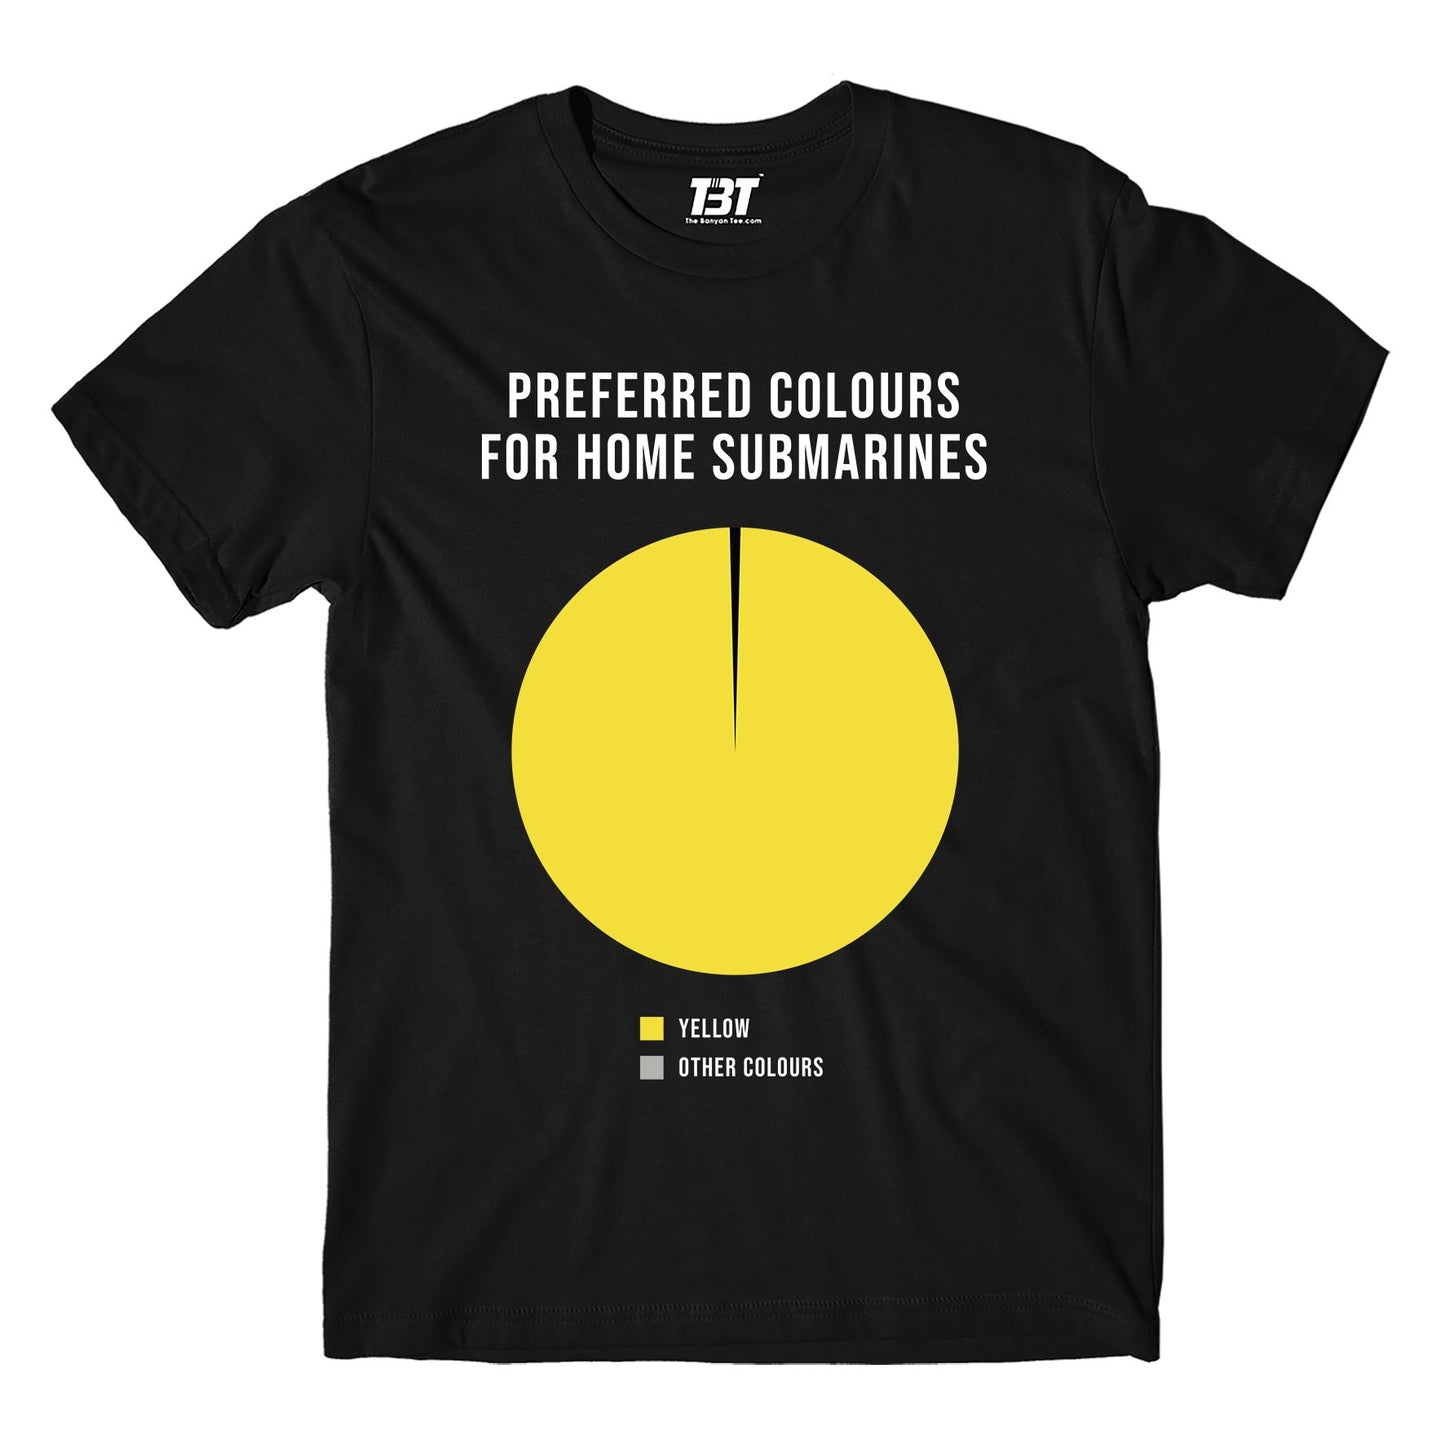 Preferred Colors For Home Submarines The Beatles T-shirt - T-shirt The Banyan Tee TBT shirt for men women boys designer stylish online cotton india